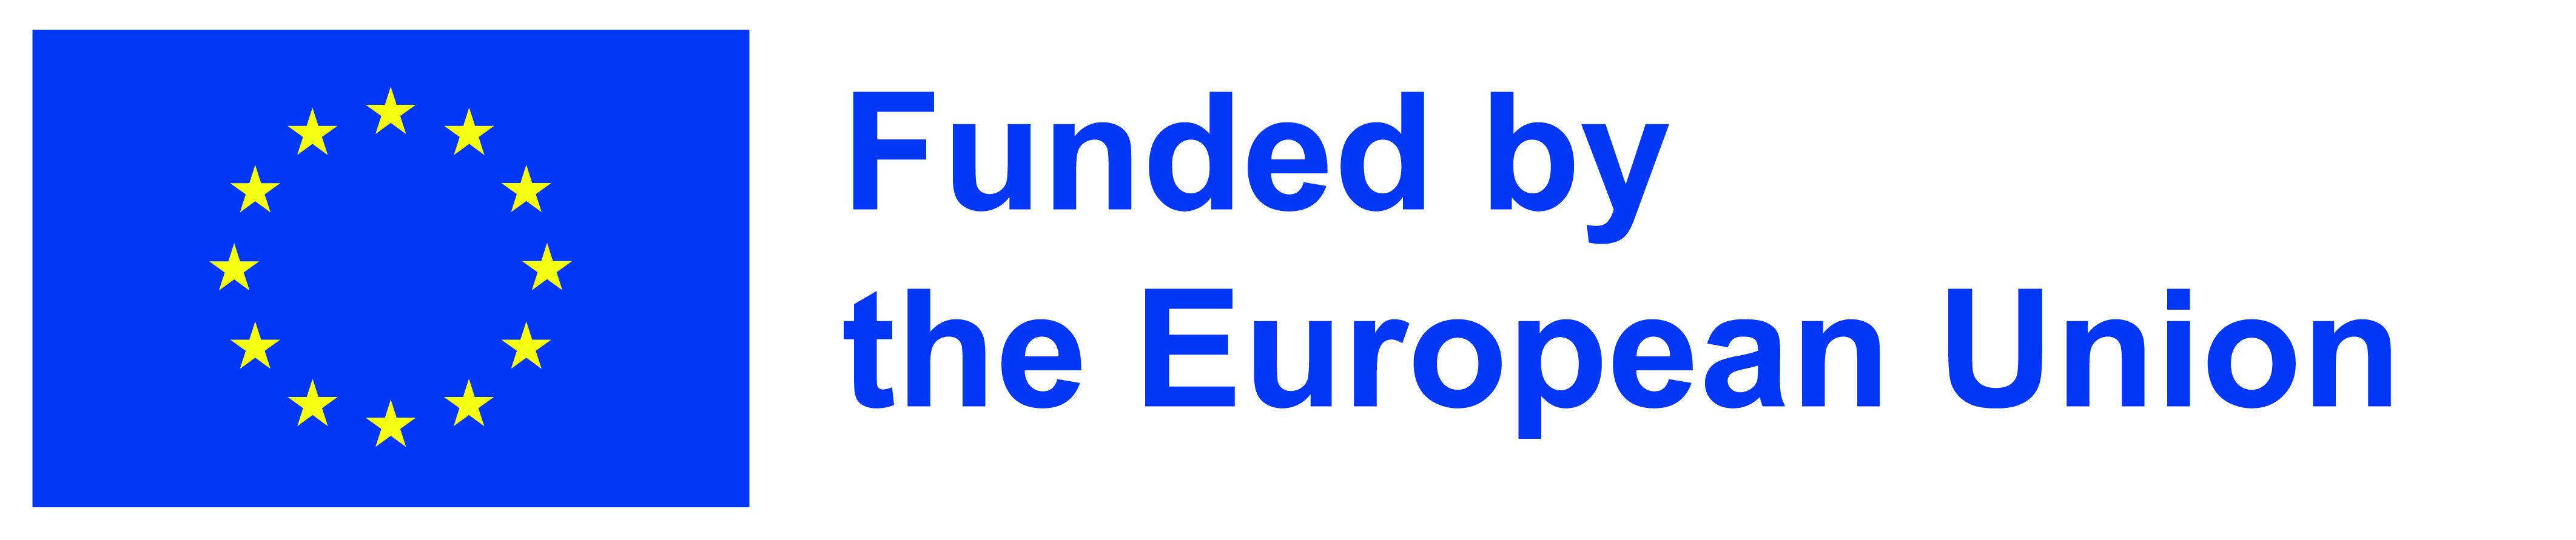 funded-by-the-EU.jpg